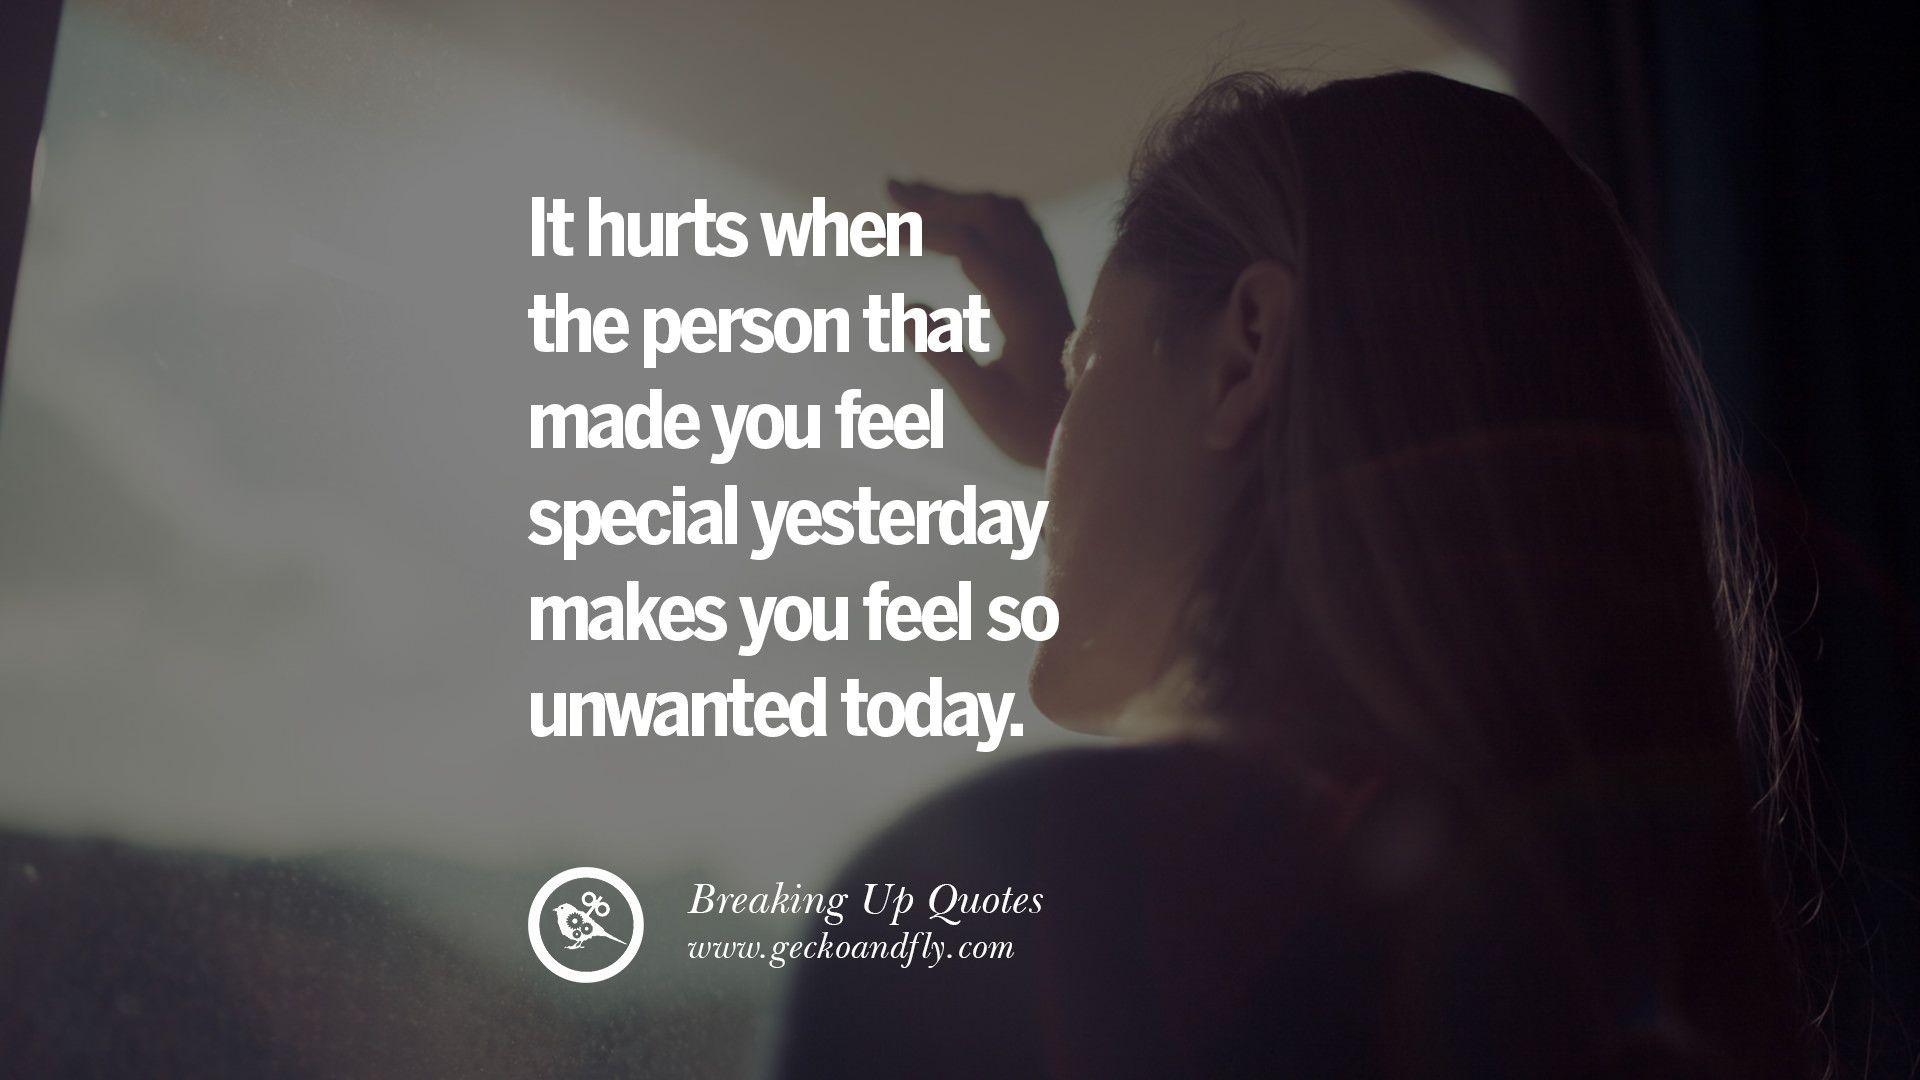 Love Hurts Wallpaper With Quotes